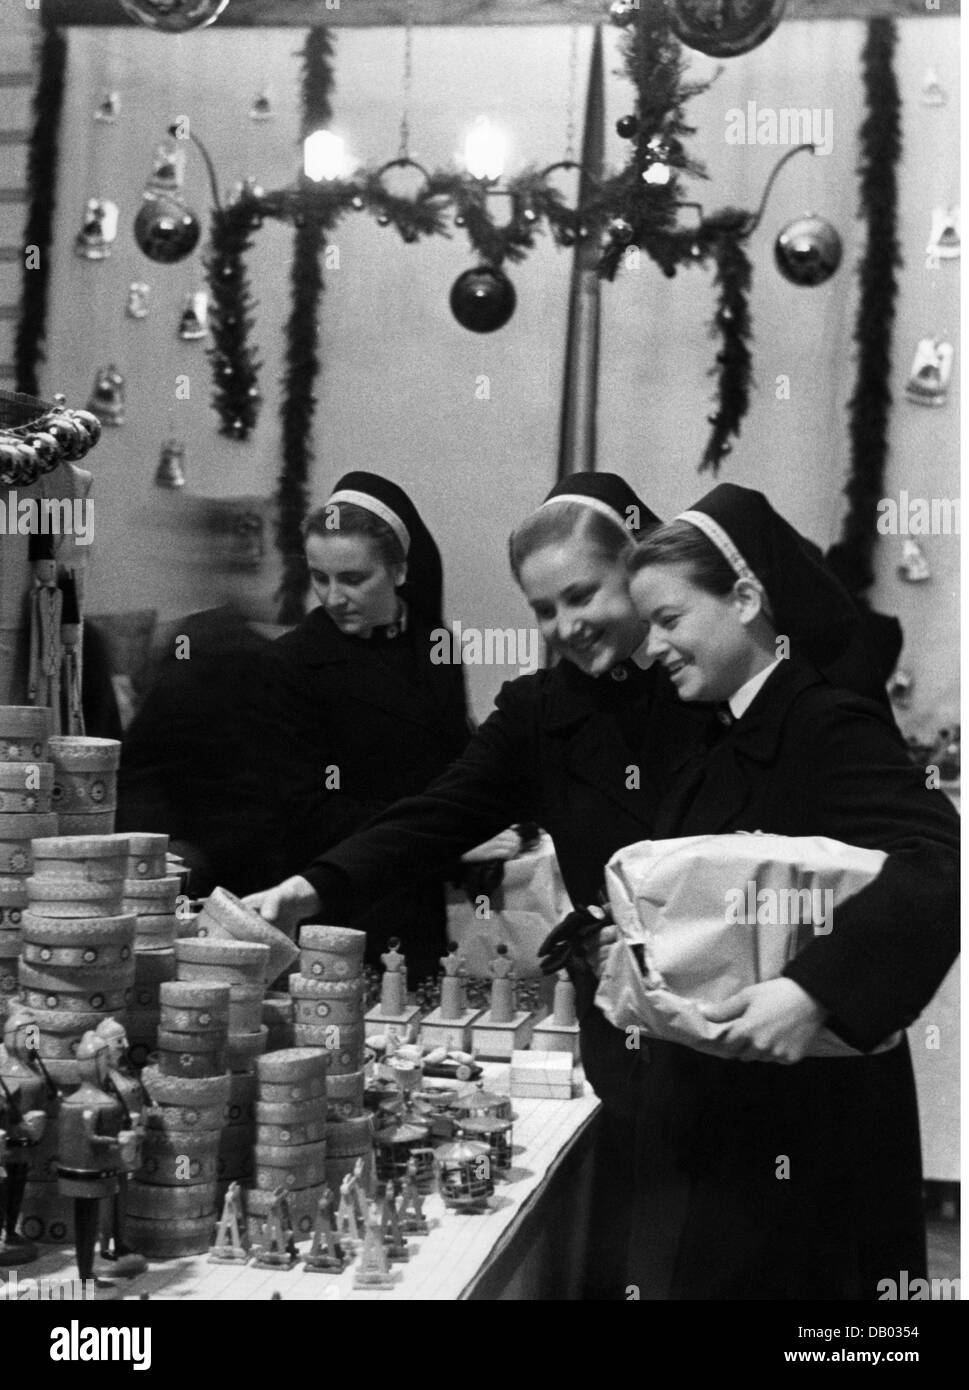 medicine, organisations, Red Cross, Germany, Deutsches Rotes Kreuz, DRK nurses choosing christmas presents, circa 1940, Additional-Rights-Clearences-Not Available Stock Photo